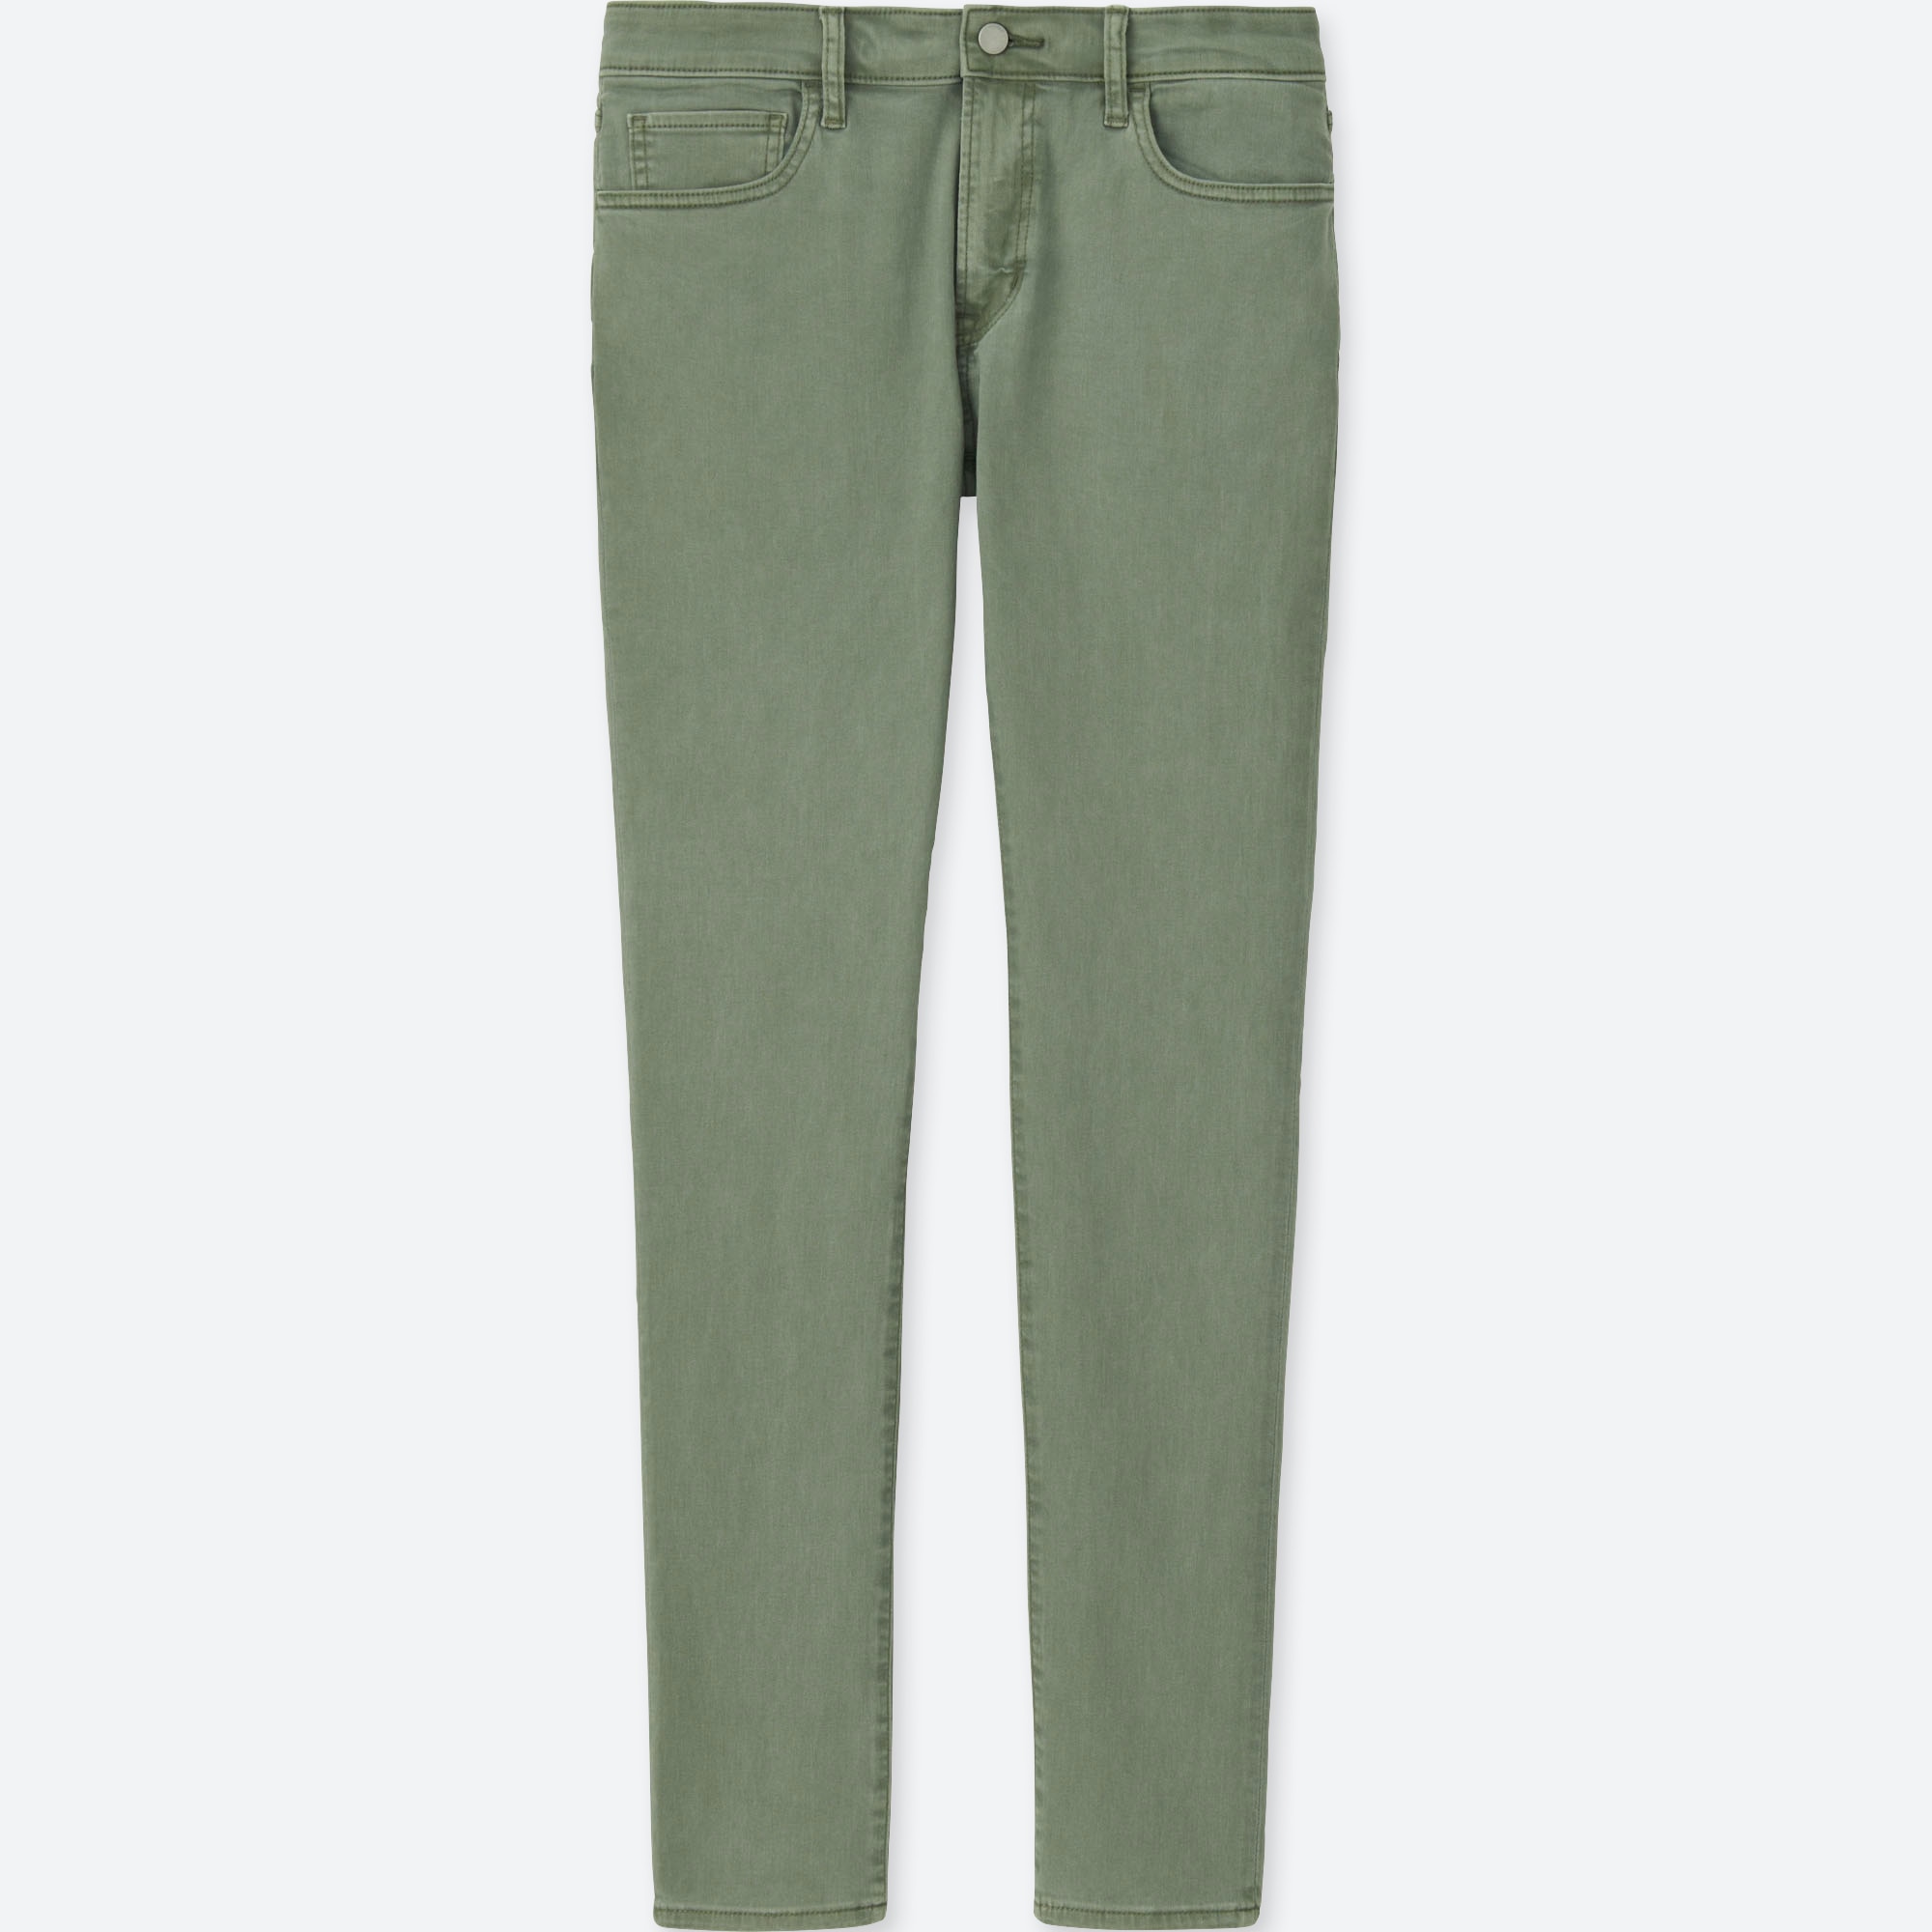 olive colored jeans mens